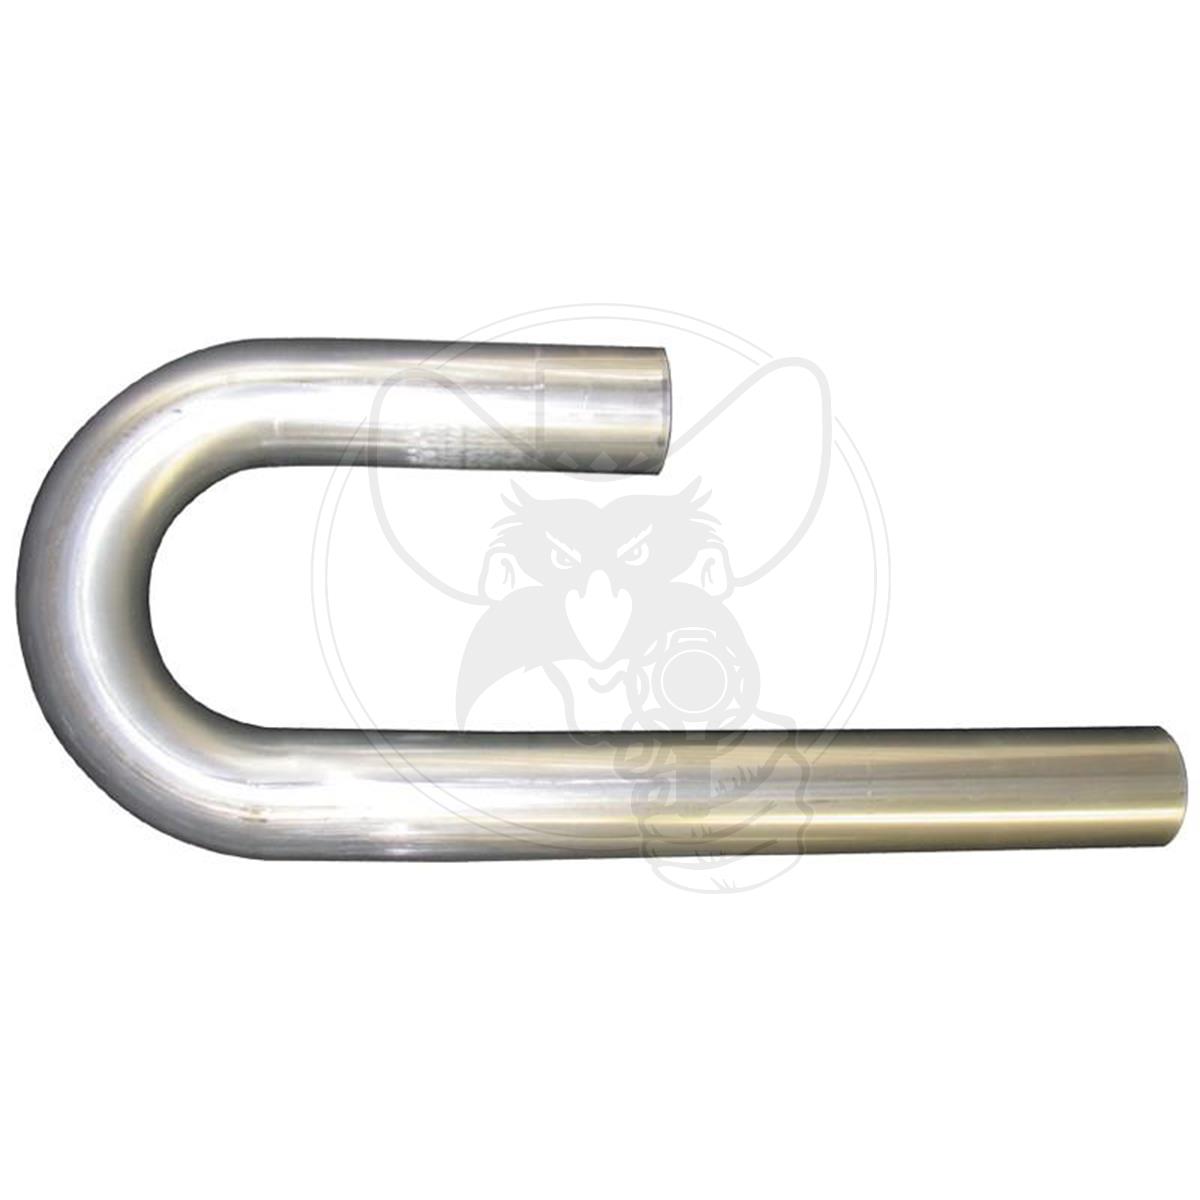 AEROFLOW 180° Stainless J-Bend Tubing 2-1/8" OD WITH 6" & 12" LEGS